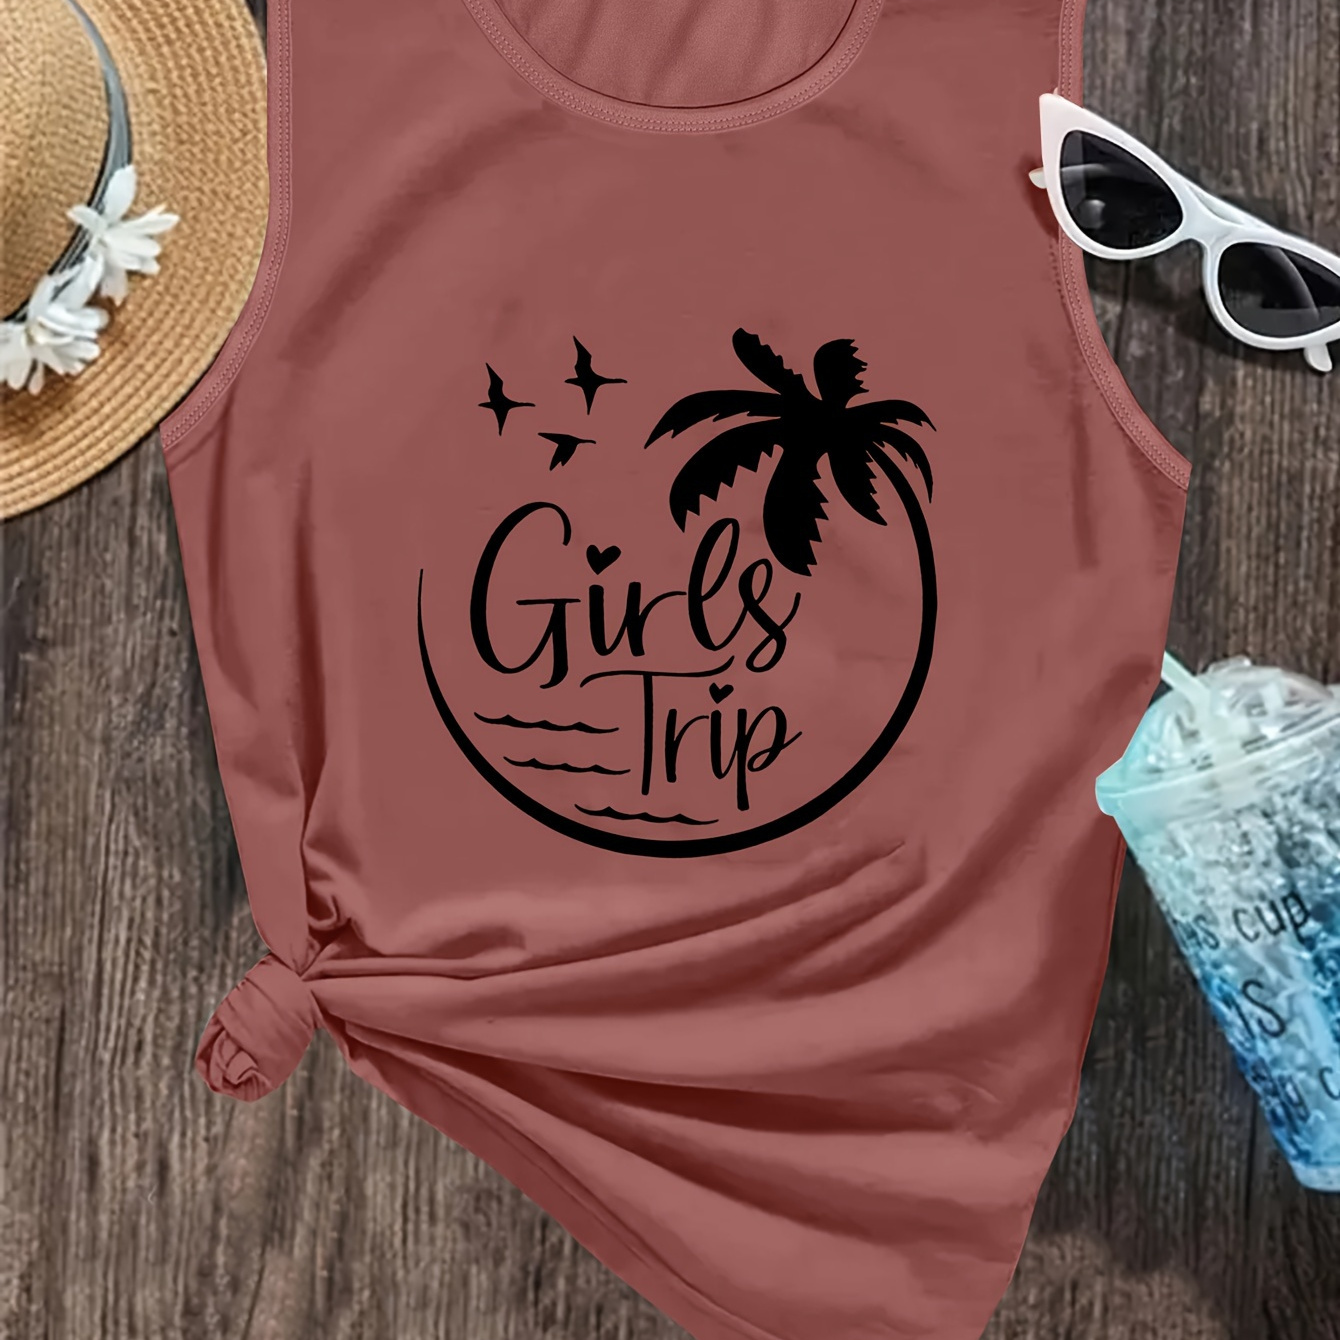 

Girls Trip Print Crew Neck Tank Top, Casual Sleeveless Top For Summer & Spring, Women's Clothing